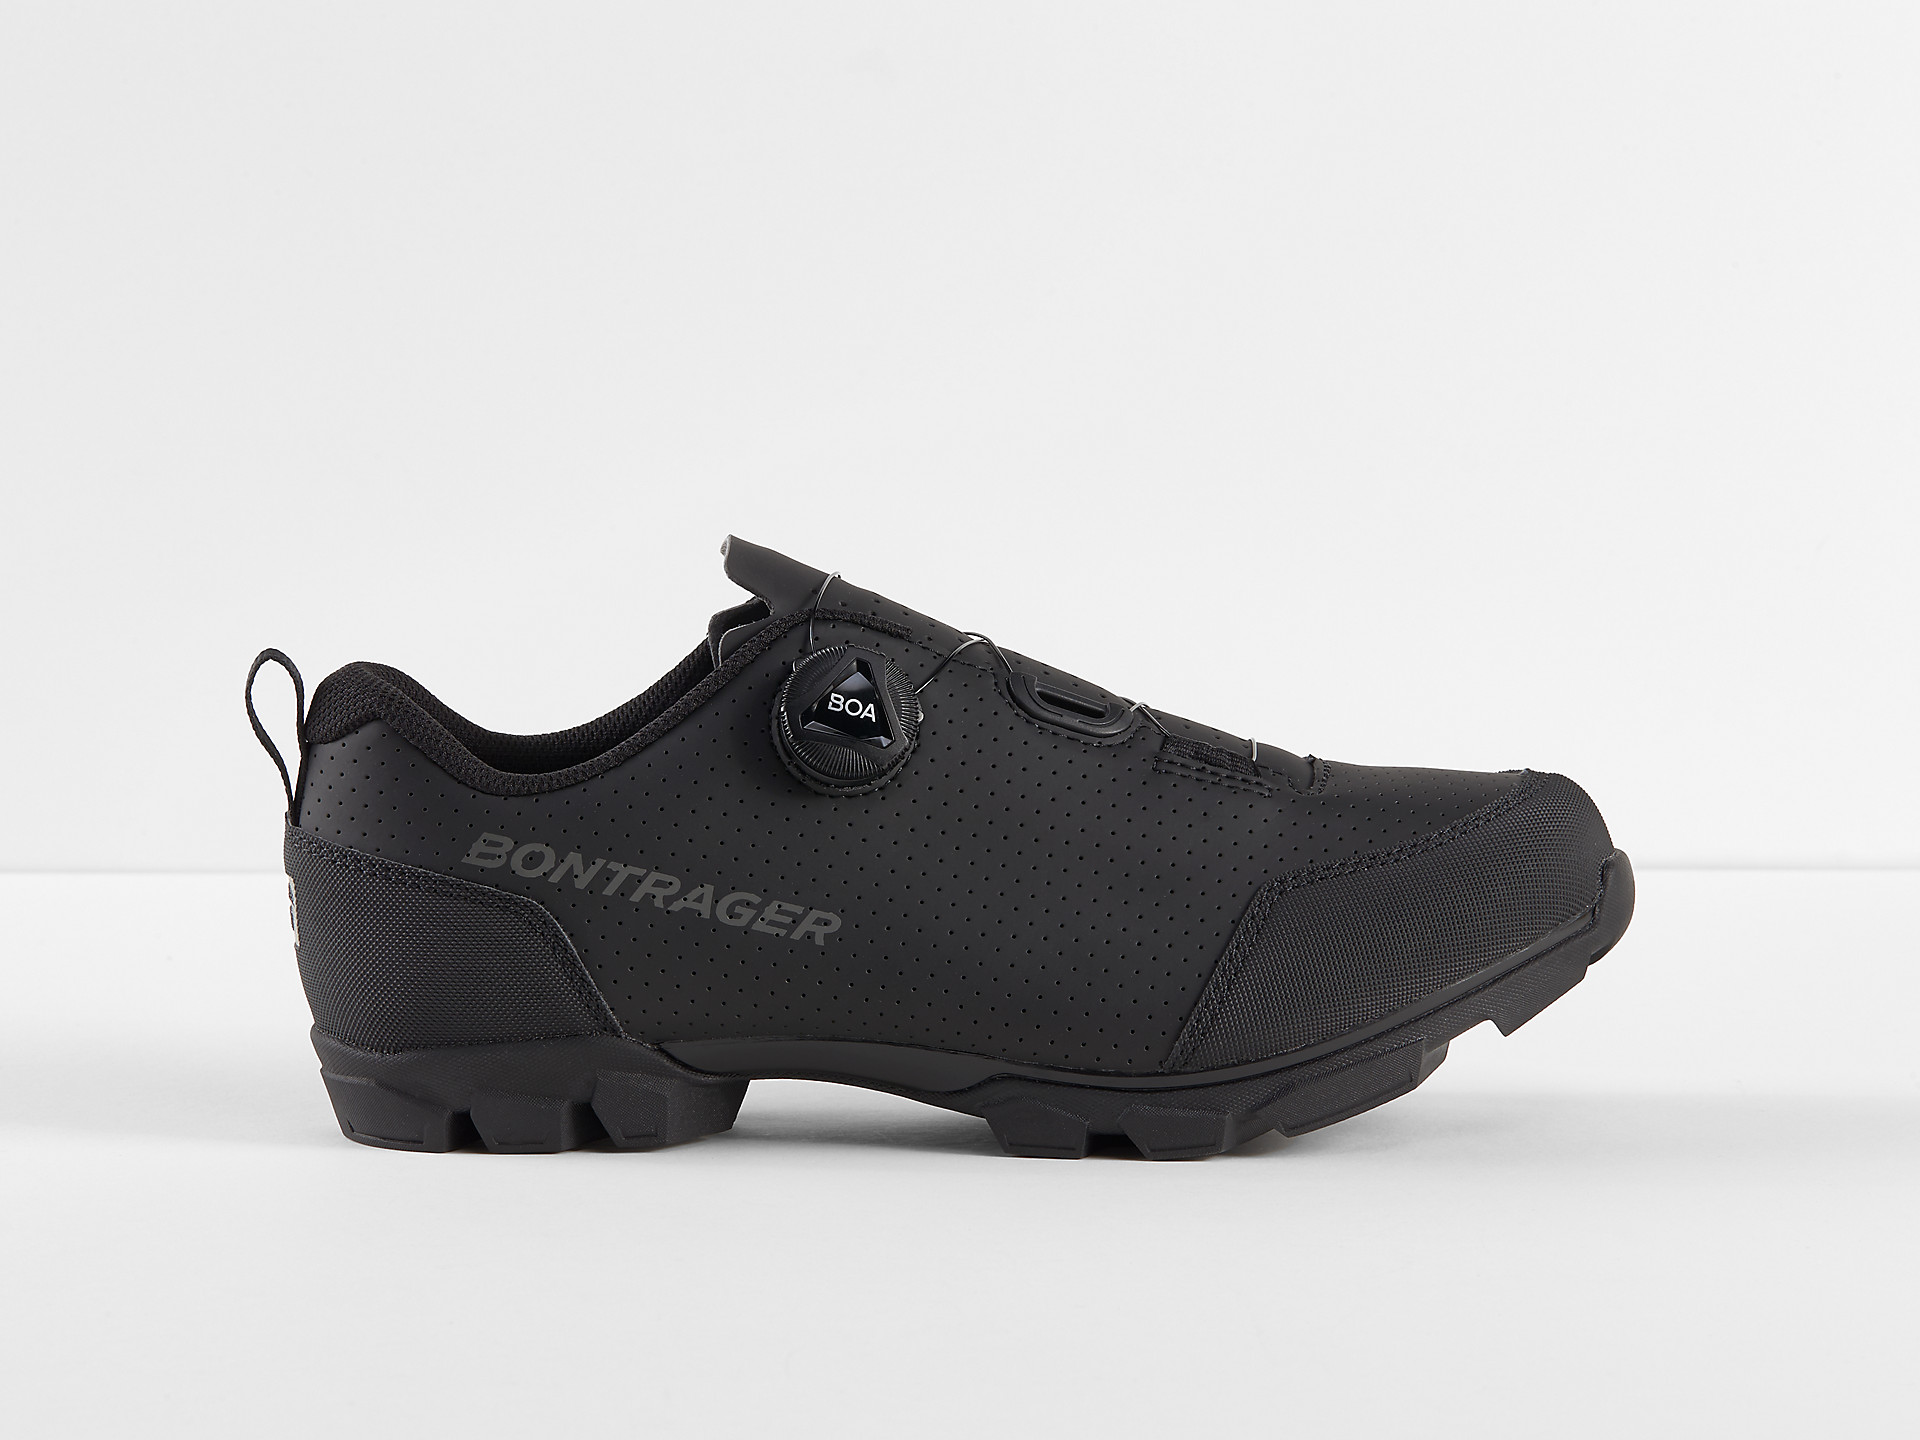 <a href="https://cycles-clement.be/product/bont-chaussures-evoke-47-black/">BONT CHAUSSURES EVOKE 47 BLACK</a>